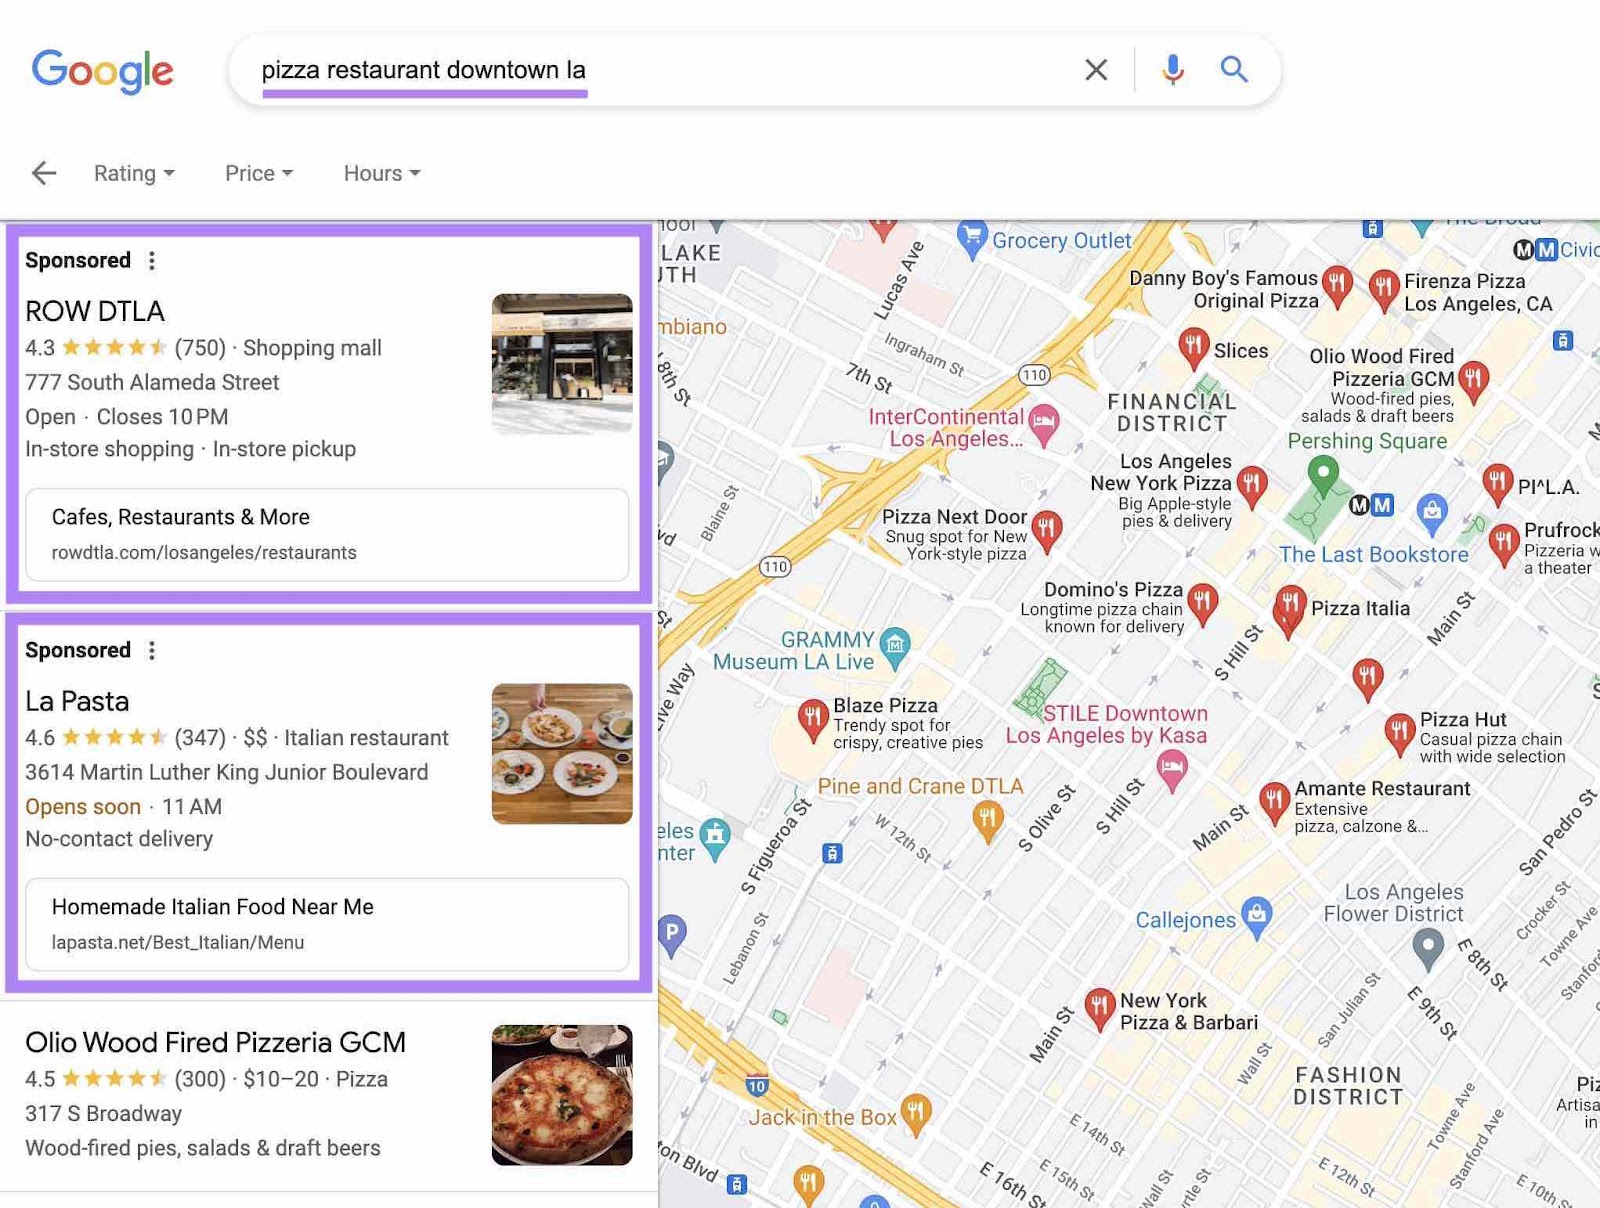 Google results for "pizza restaurant downtown la" showing sponsored results in the local finder.